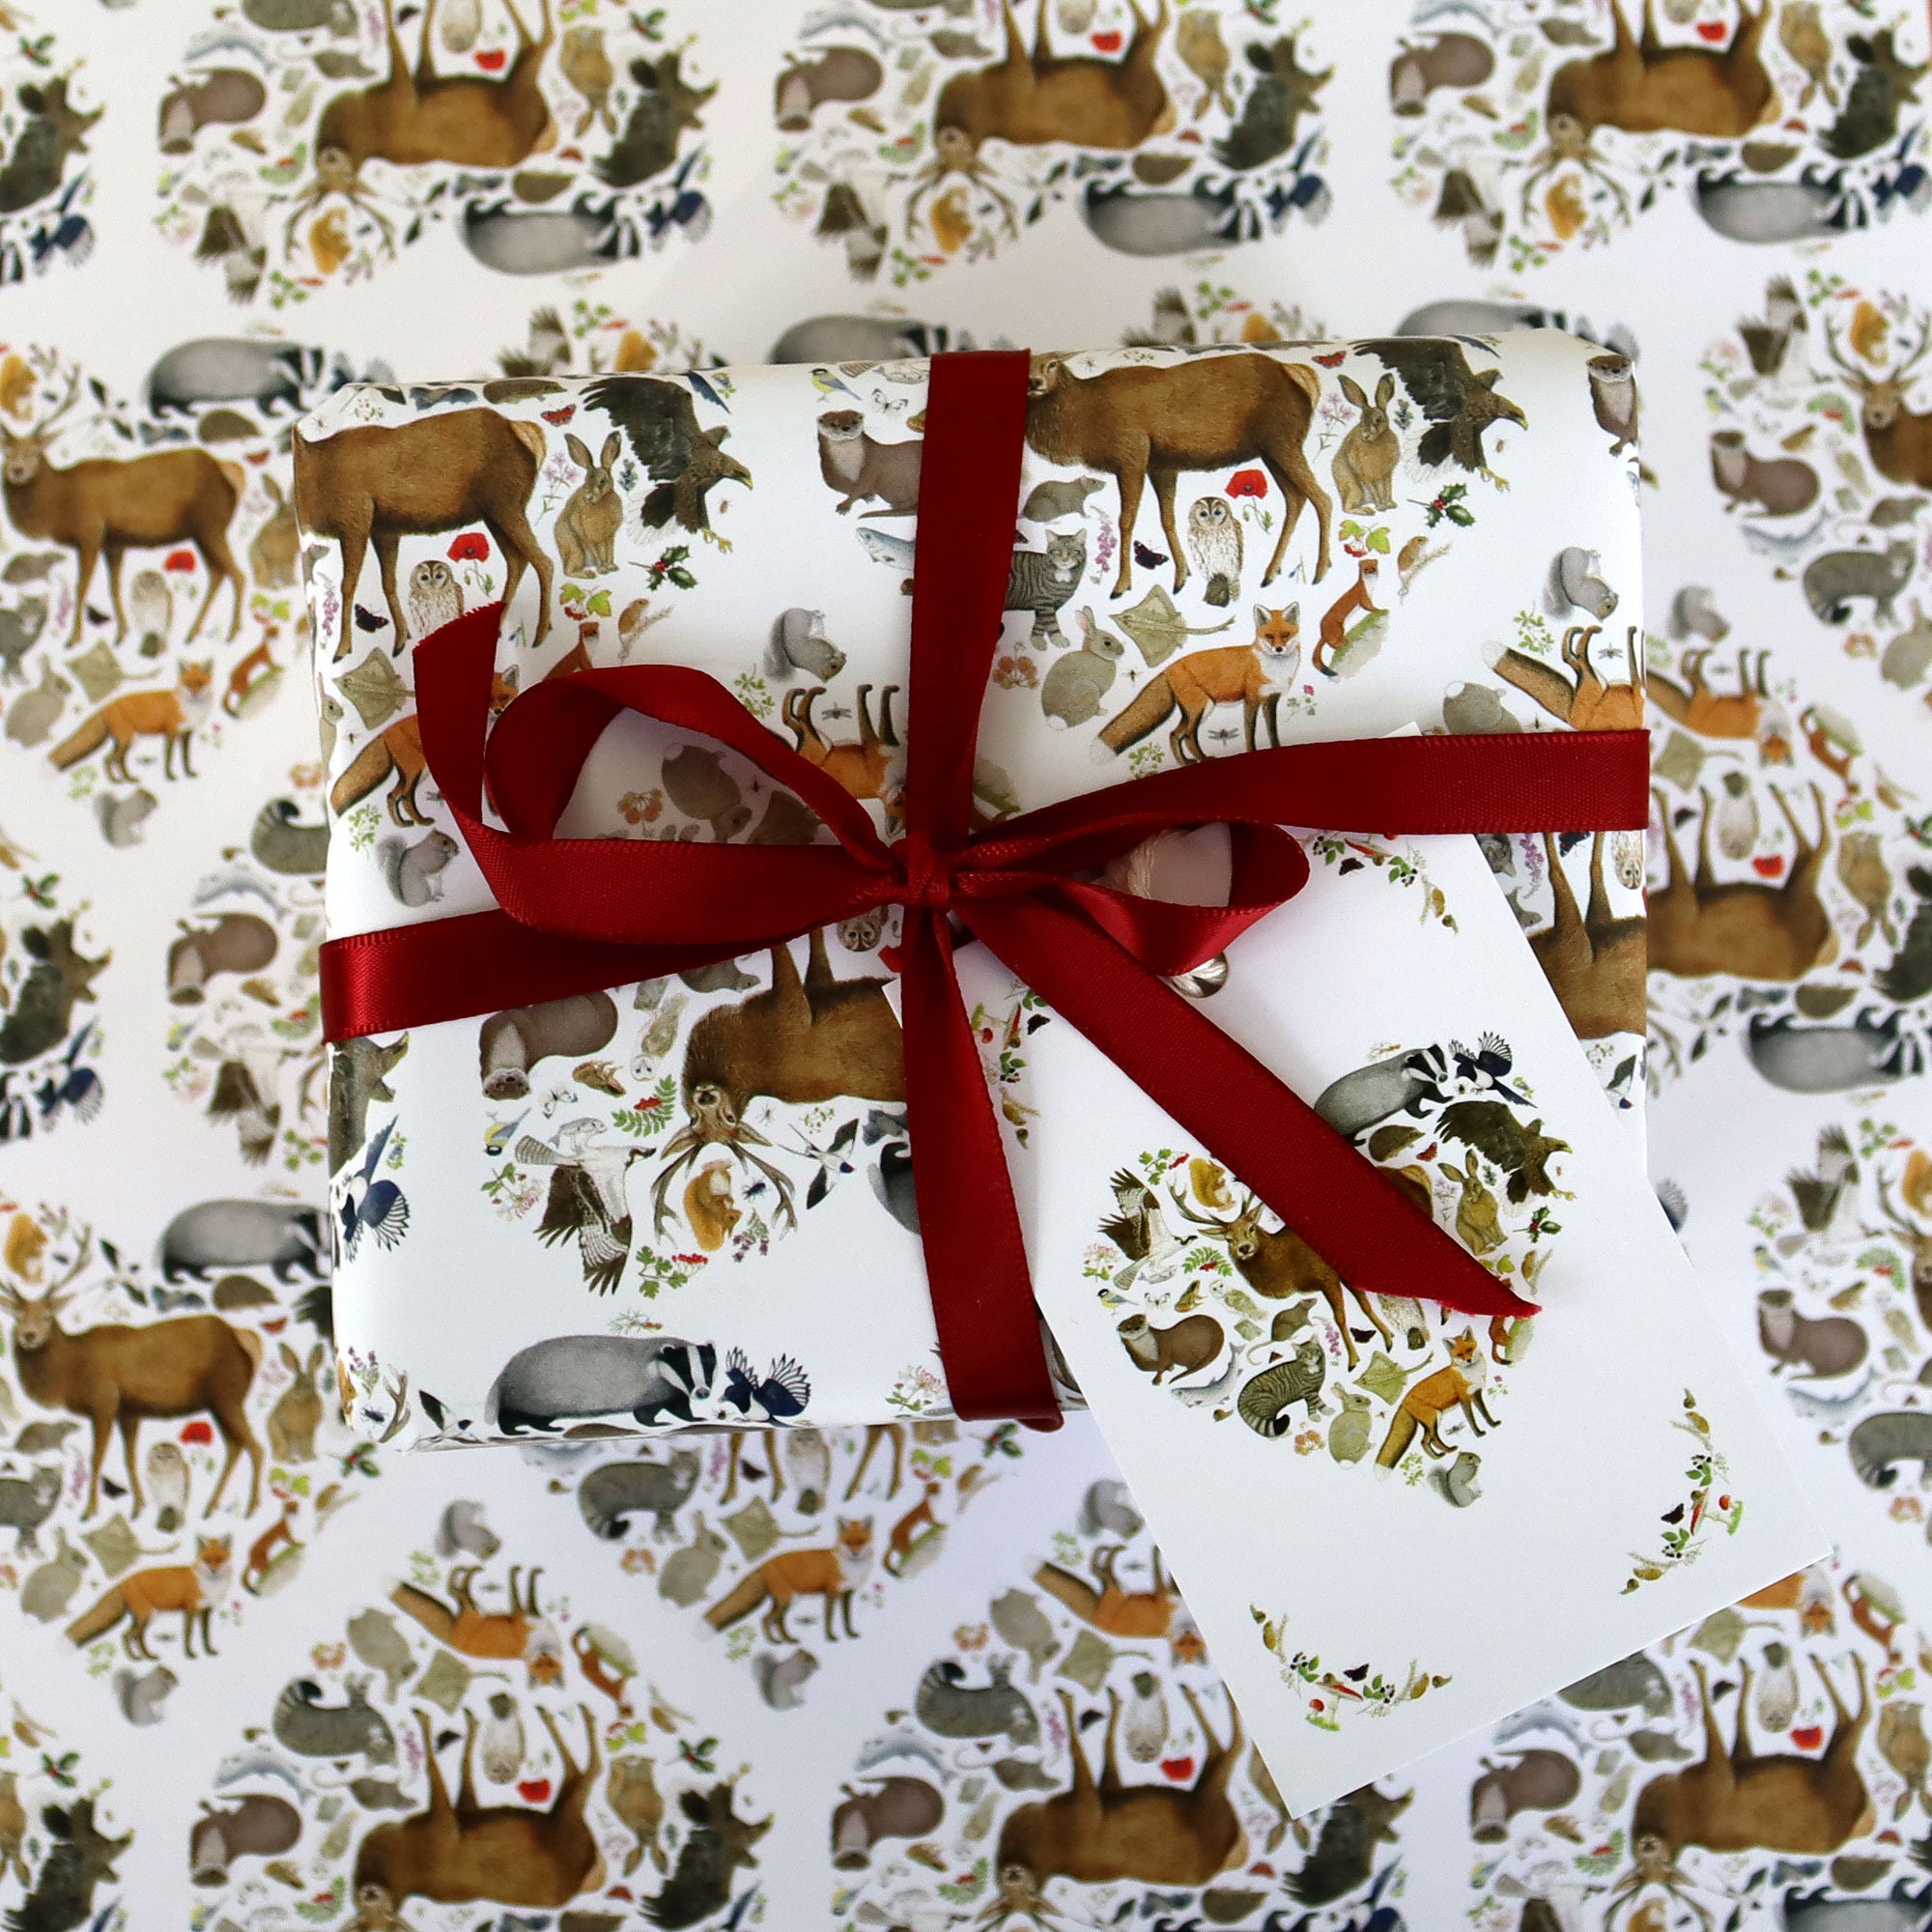 Woodland wrapping paper. Red squirrel gift wrap. wildlife gift. woodland  gift. Badger, hares, bunnies, owls, toadstools. Mixed animal paper